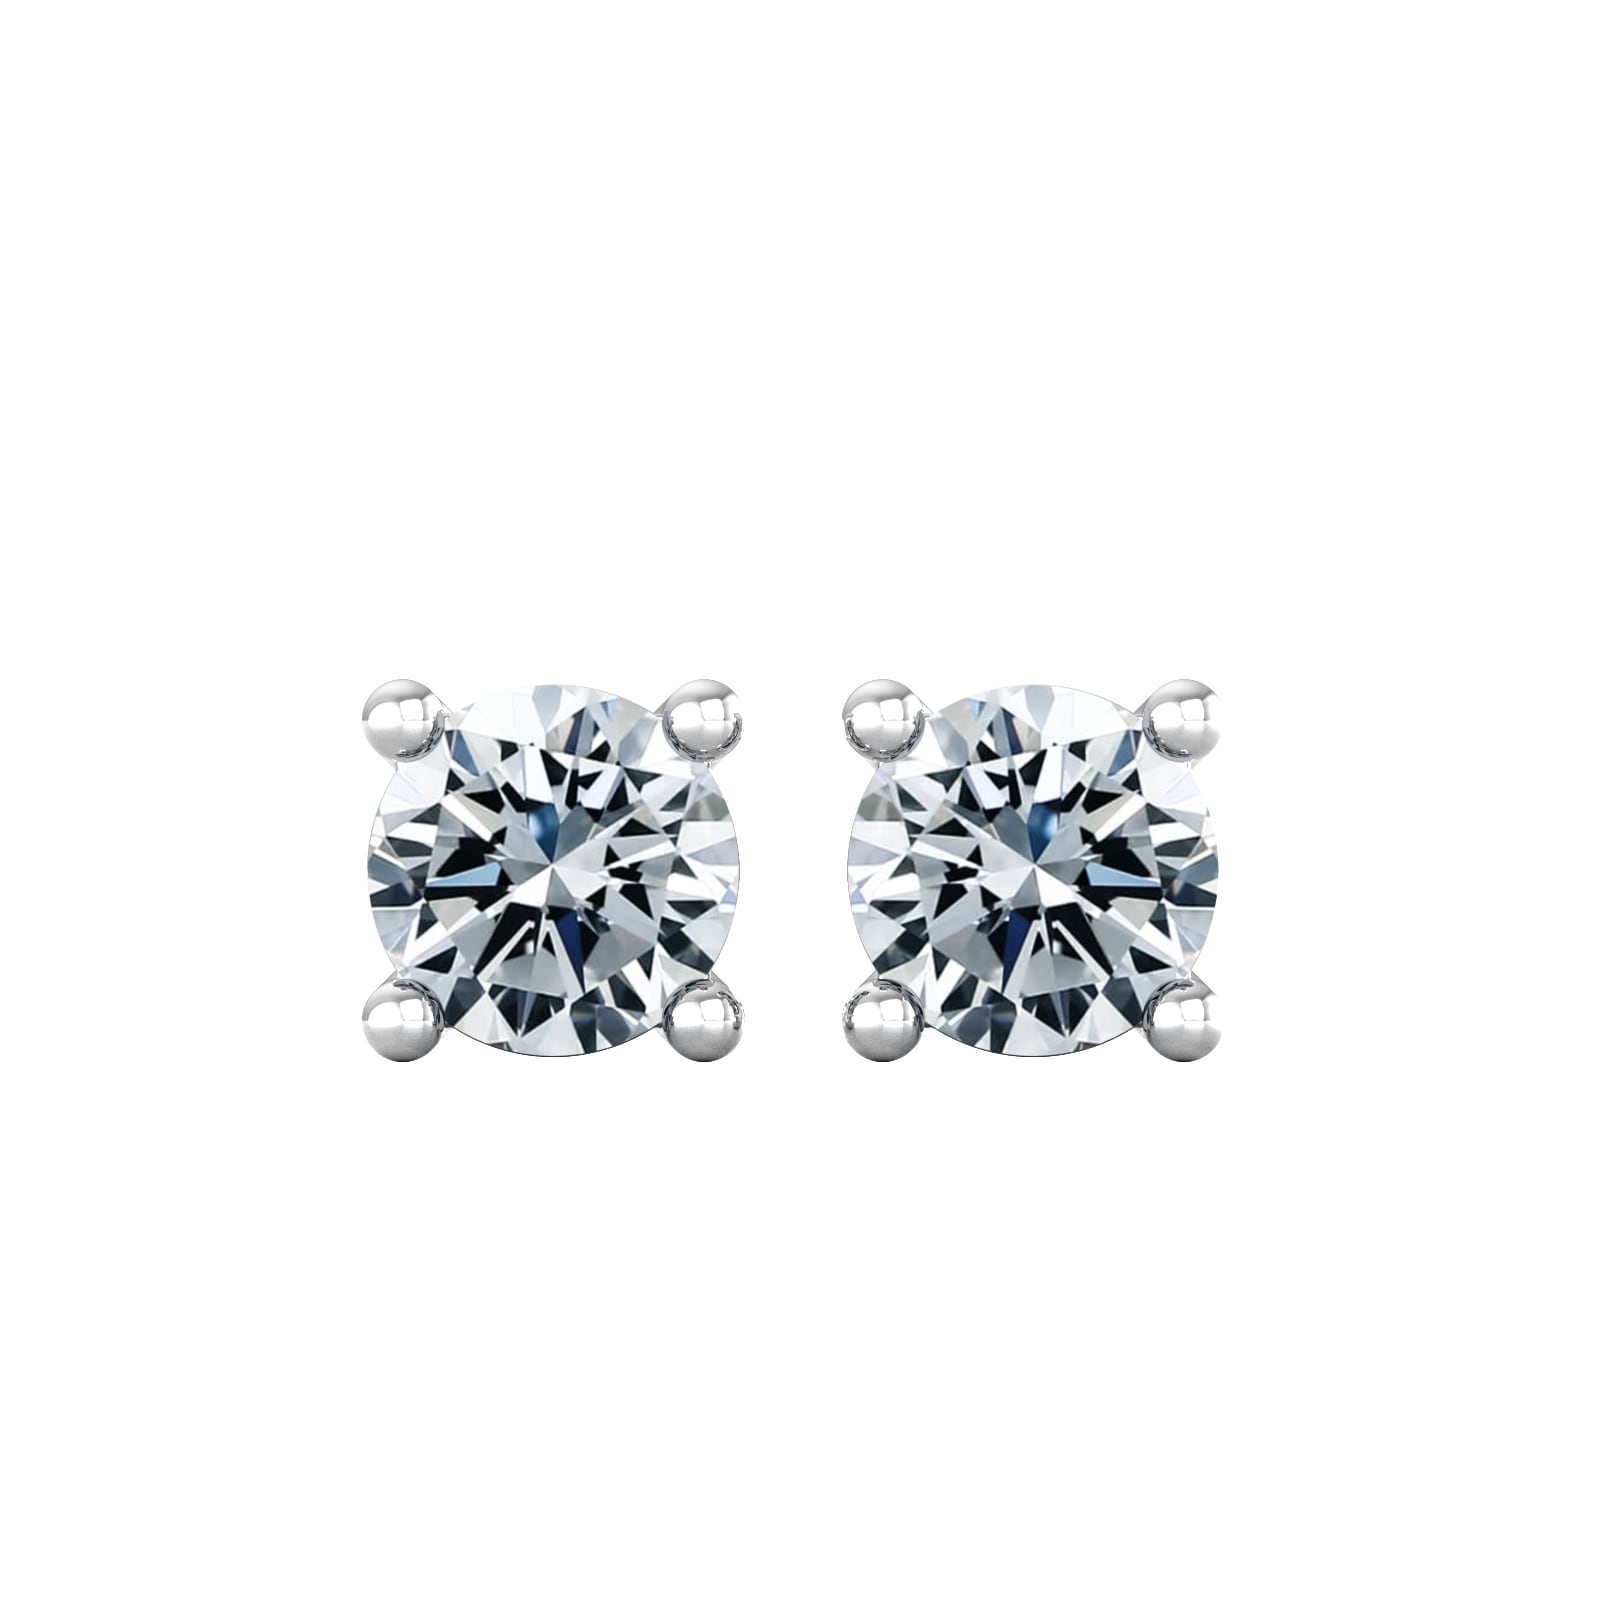 9ct White Gold 0.60cttw Solitaire Diamond Stud Earrings